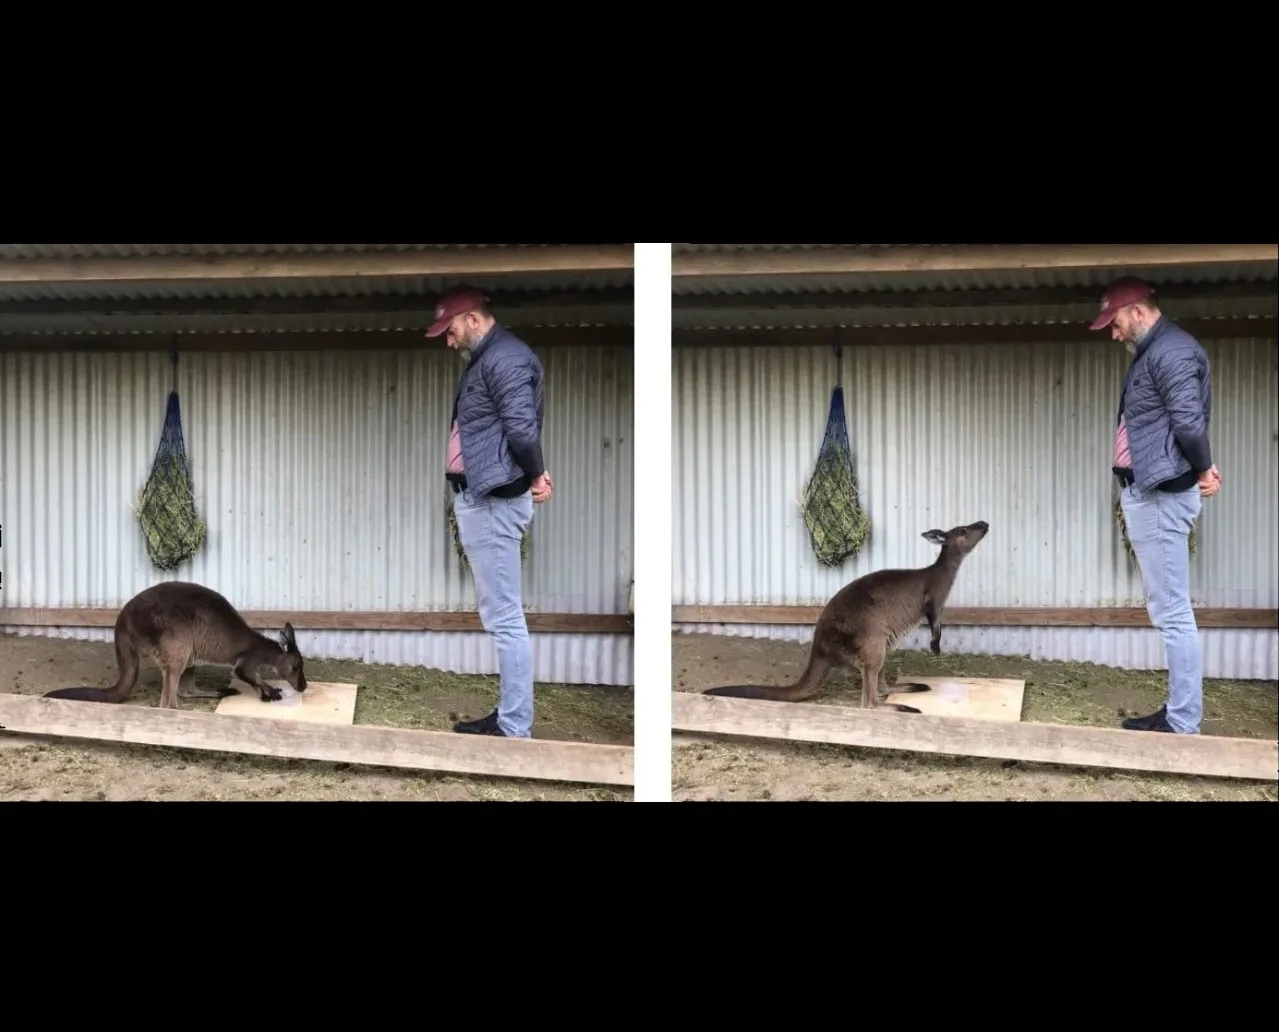 Kangaroos Communicate With Humans Like Dogs in Experiments